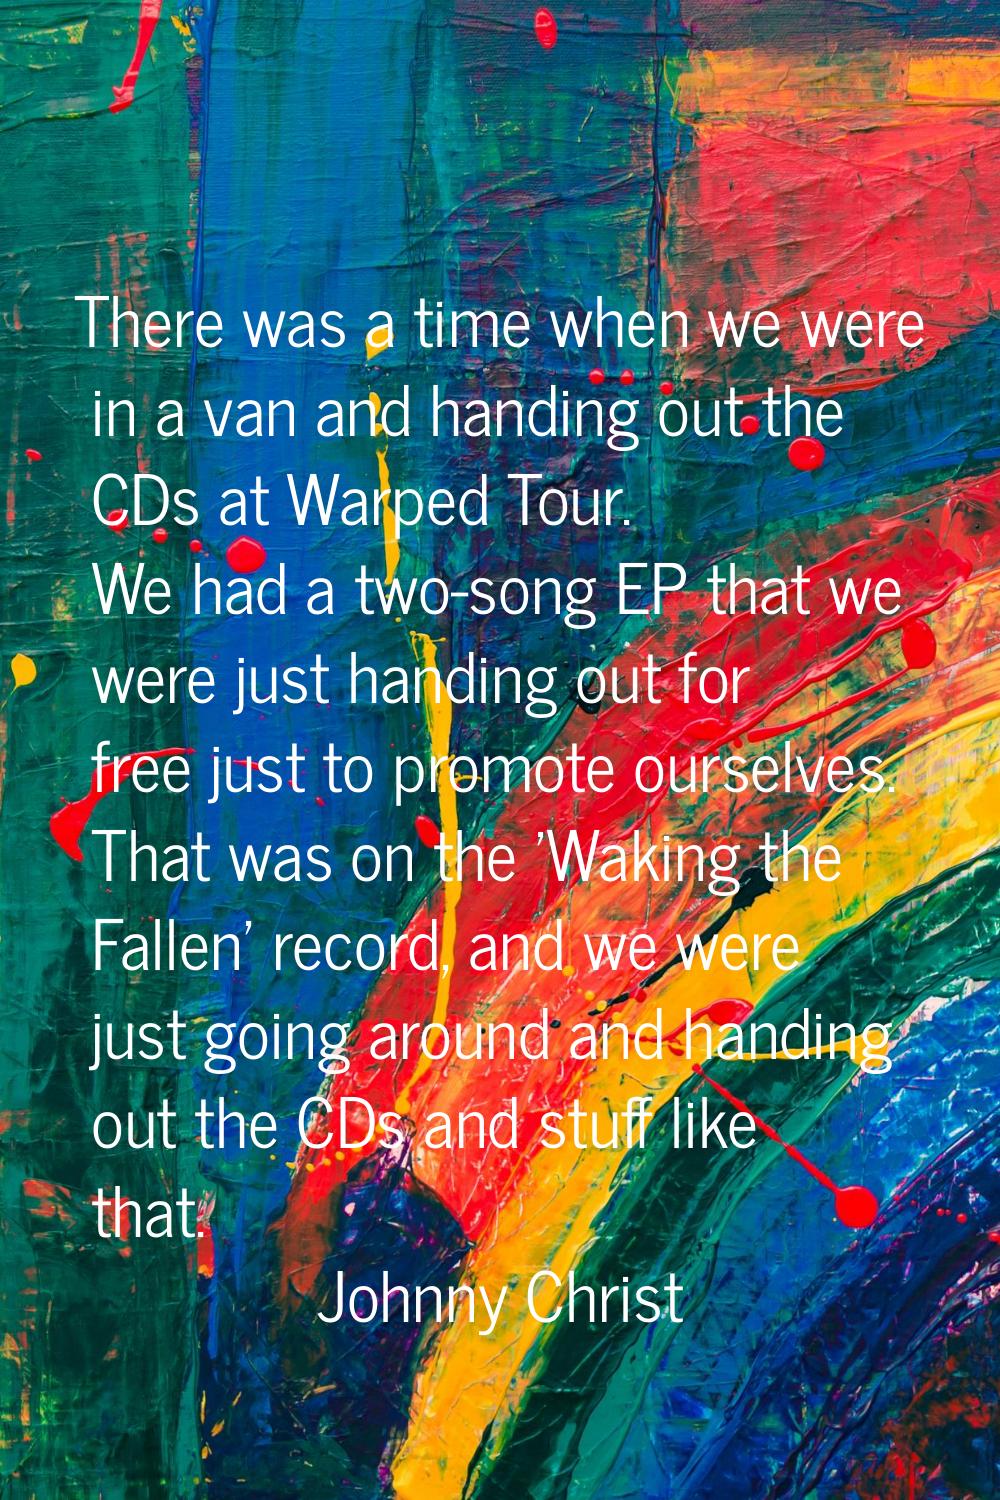 There was a time when we were in a van and handing out the CDs at Warped Tour. We had a two-song EP